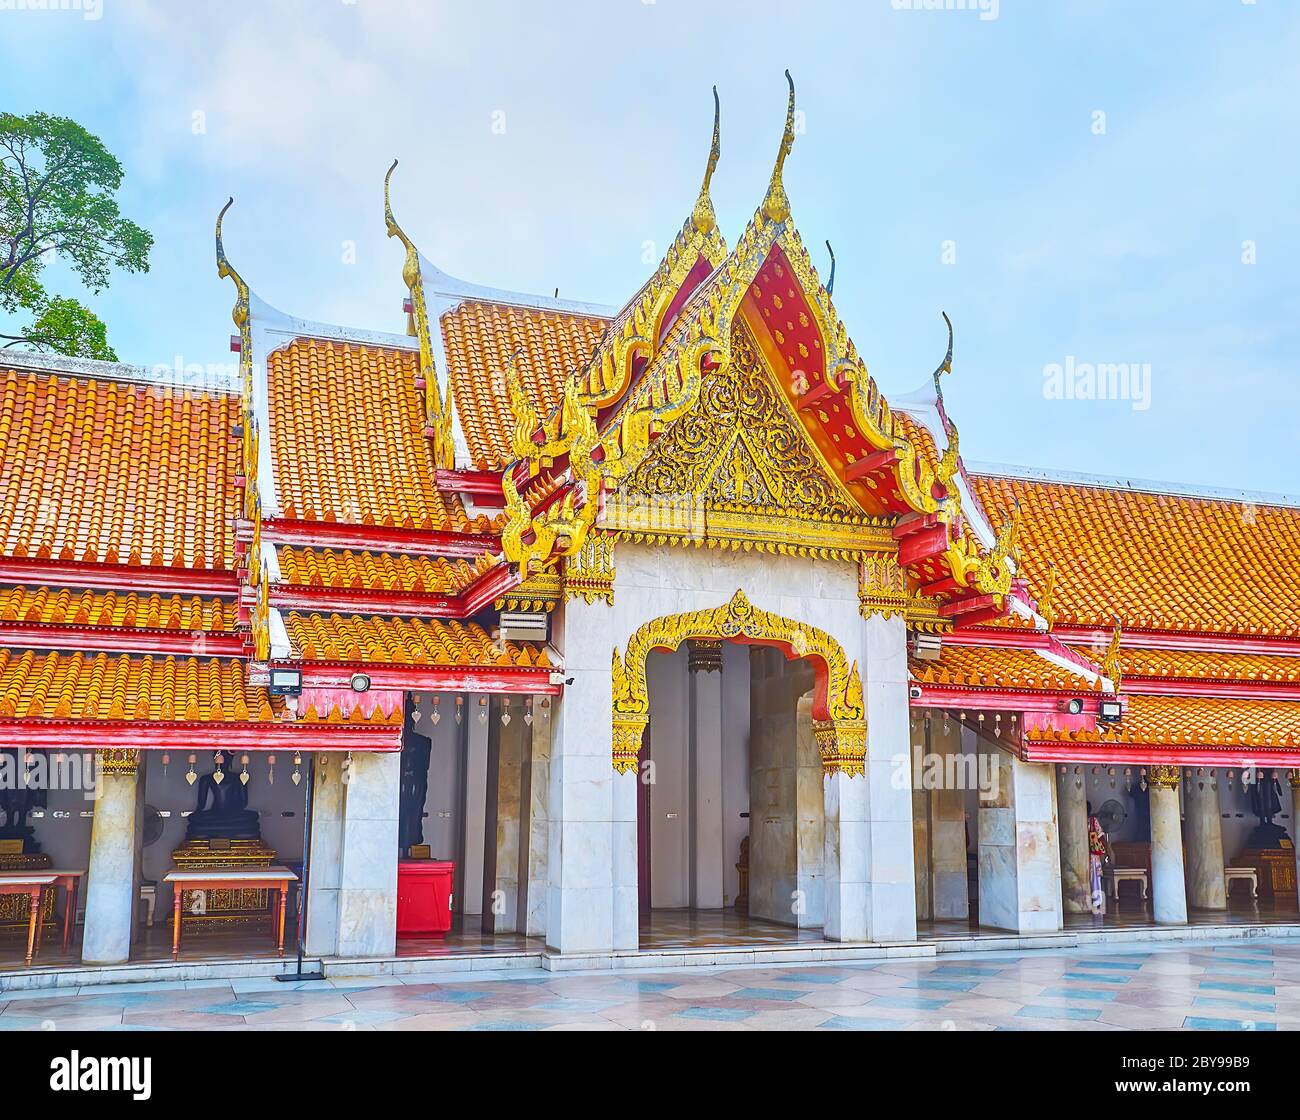 BANGKOK, THAILAND - MAY 13, 2019: The complex pyathat roof of the gallery with gilt and mirror decors, carvings and curved finials, Wat Benchamabophit Stock Photo